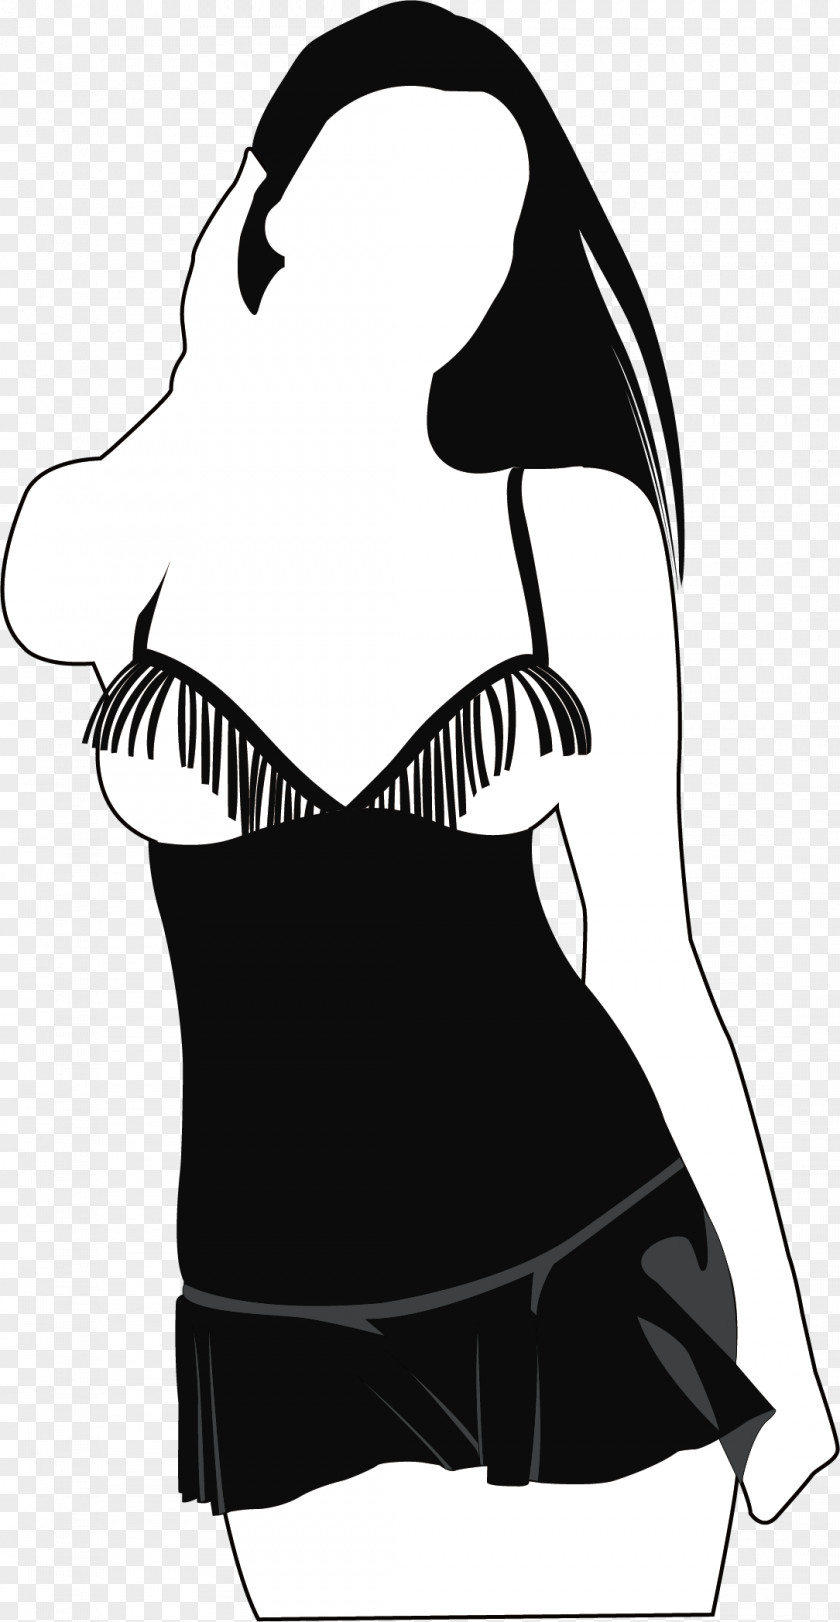 Cartoon Woman Silhouette Black And White Illustration PNG